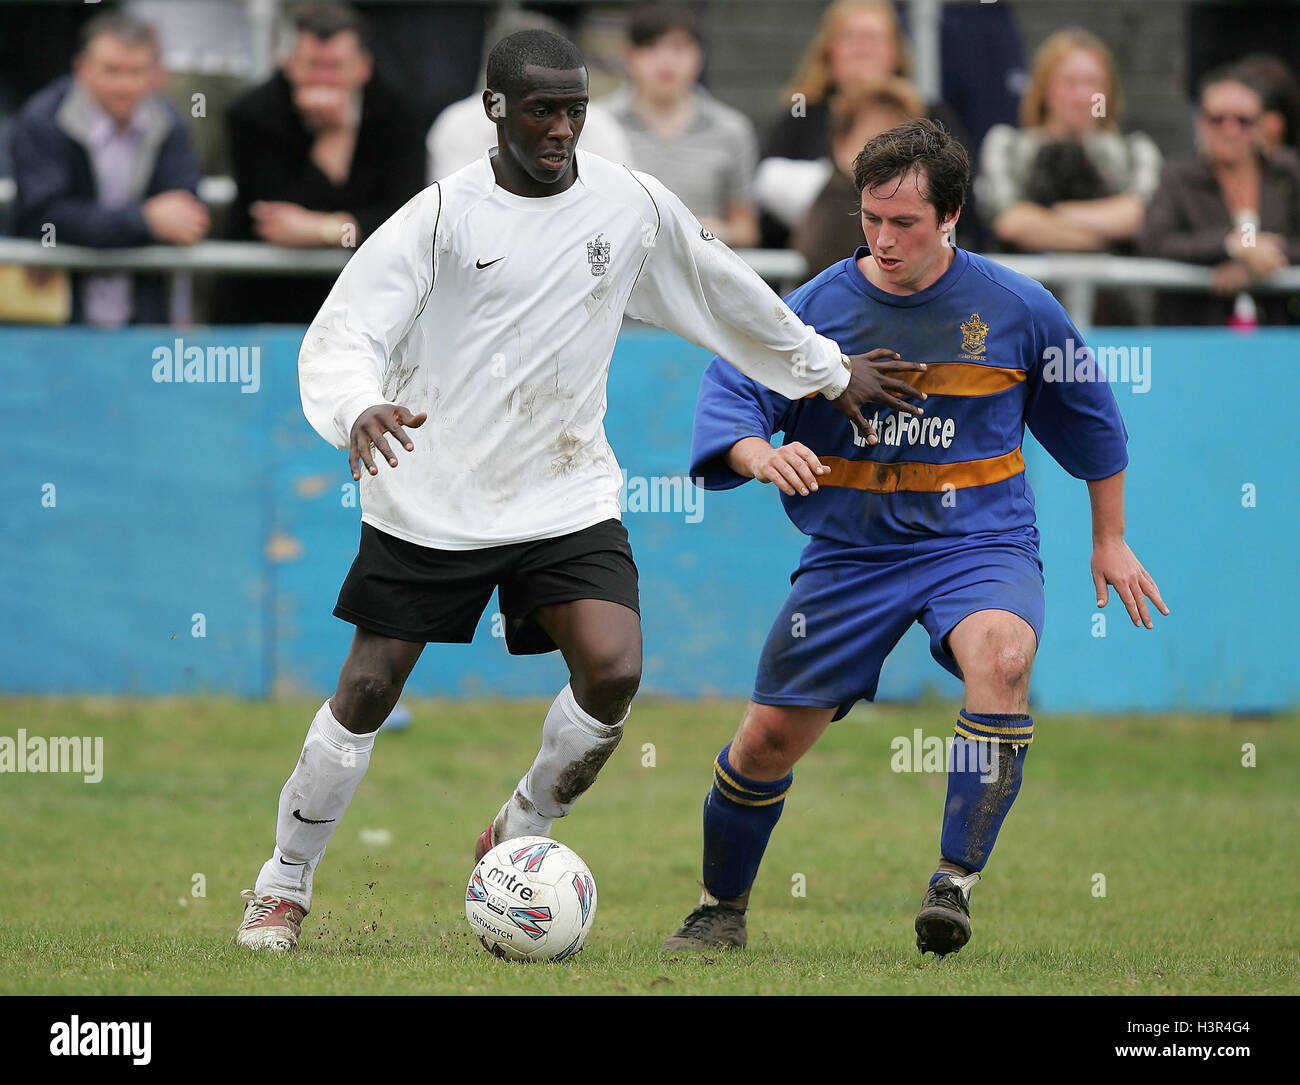 Michael Begg of Brentwood Town FC (L) in action against Romford's Ricki Mackin - 07/05/07. Stock Photo